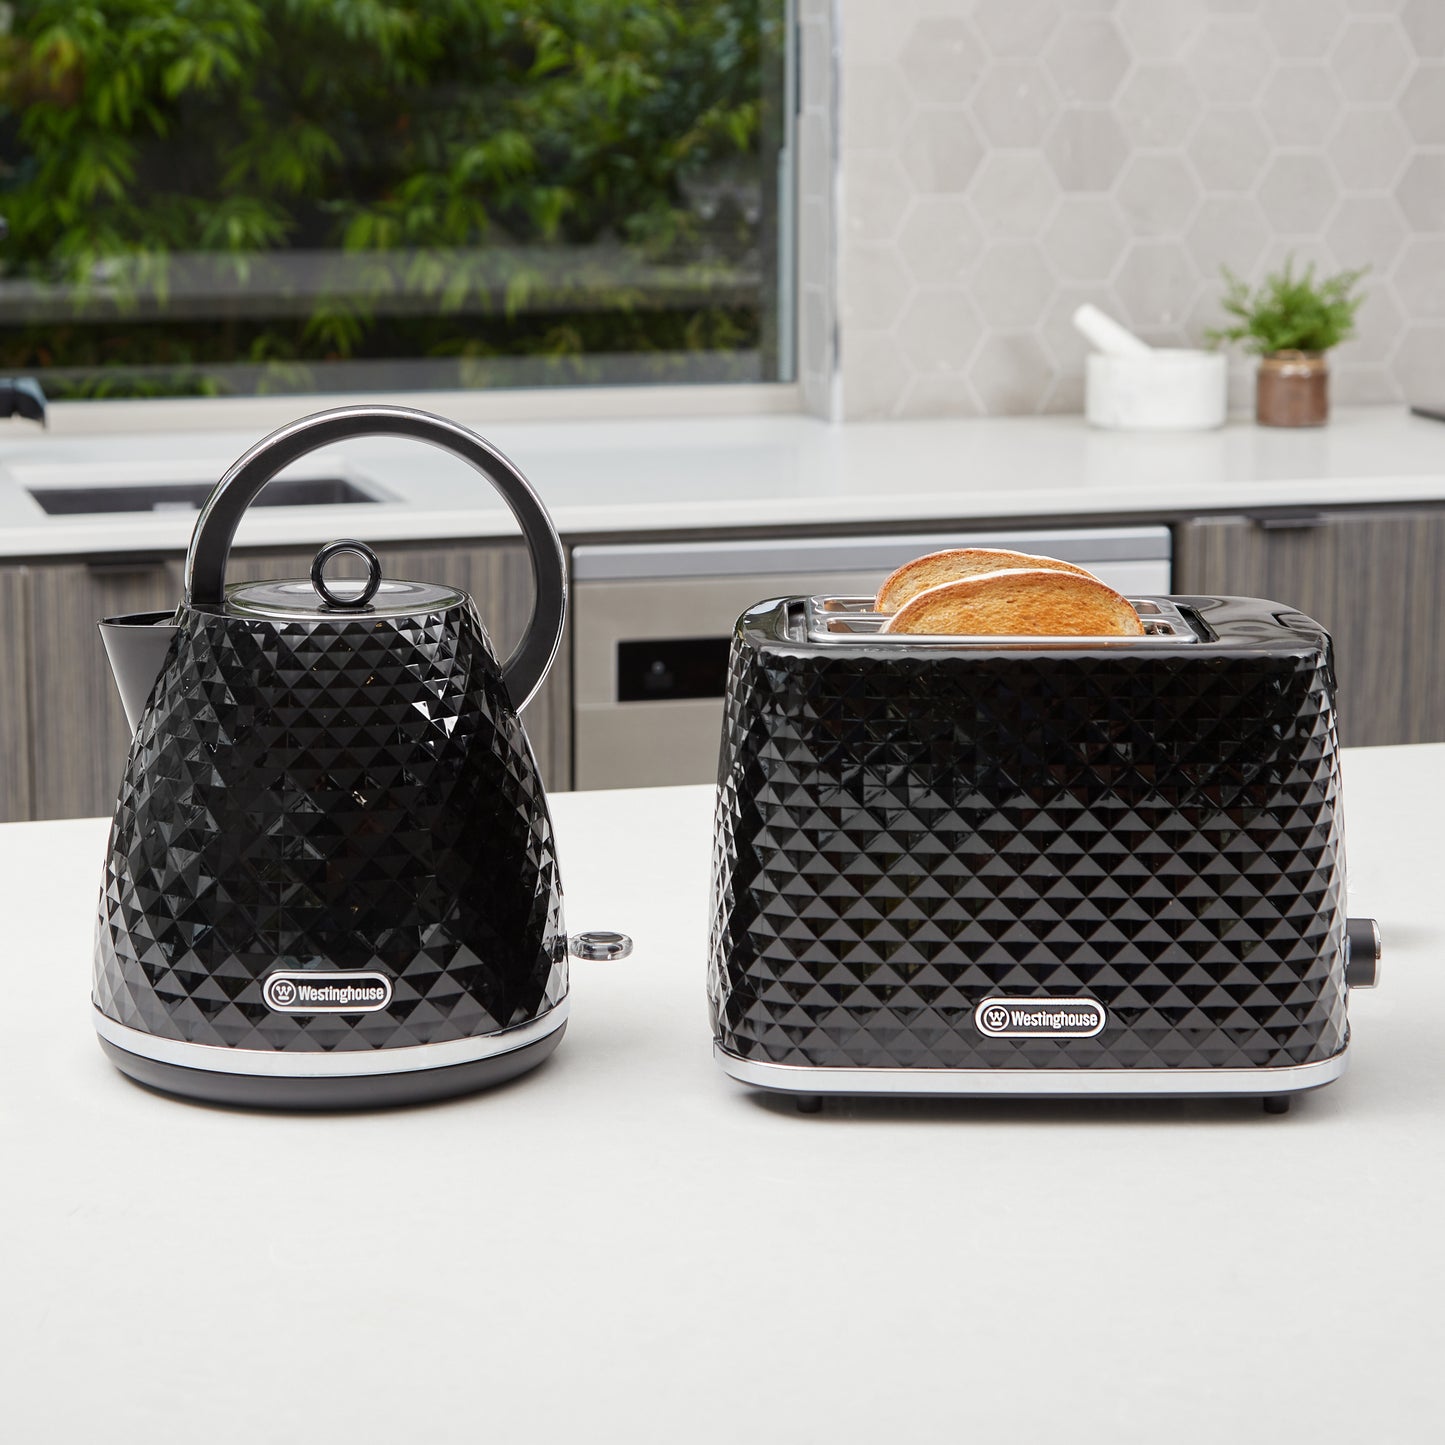 Westinghouse Kettle and Toaster Pack Black Diamond 1.7L Kettle, 2 Slice Toaster